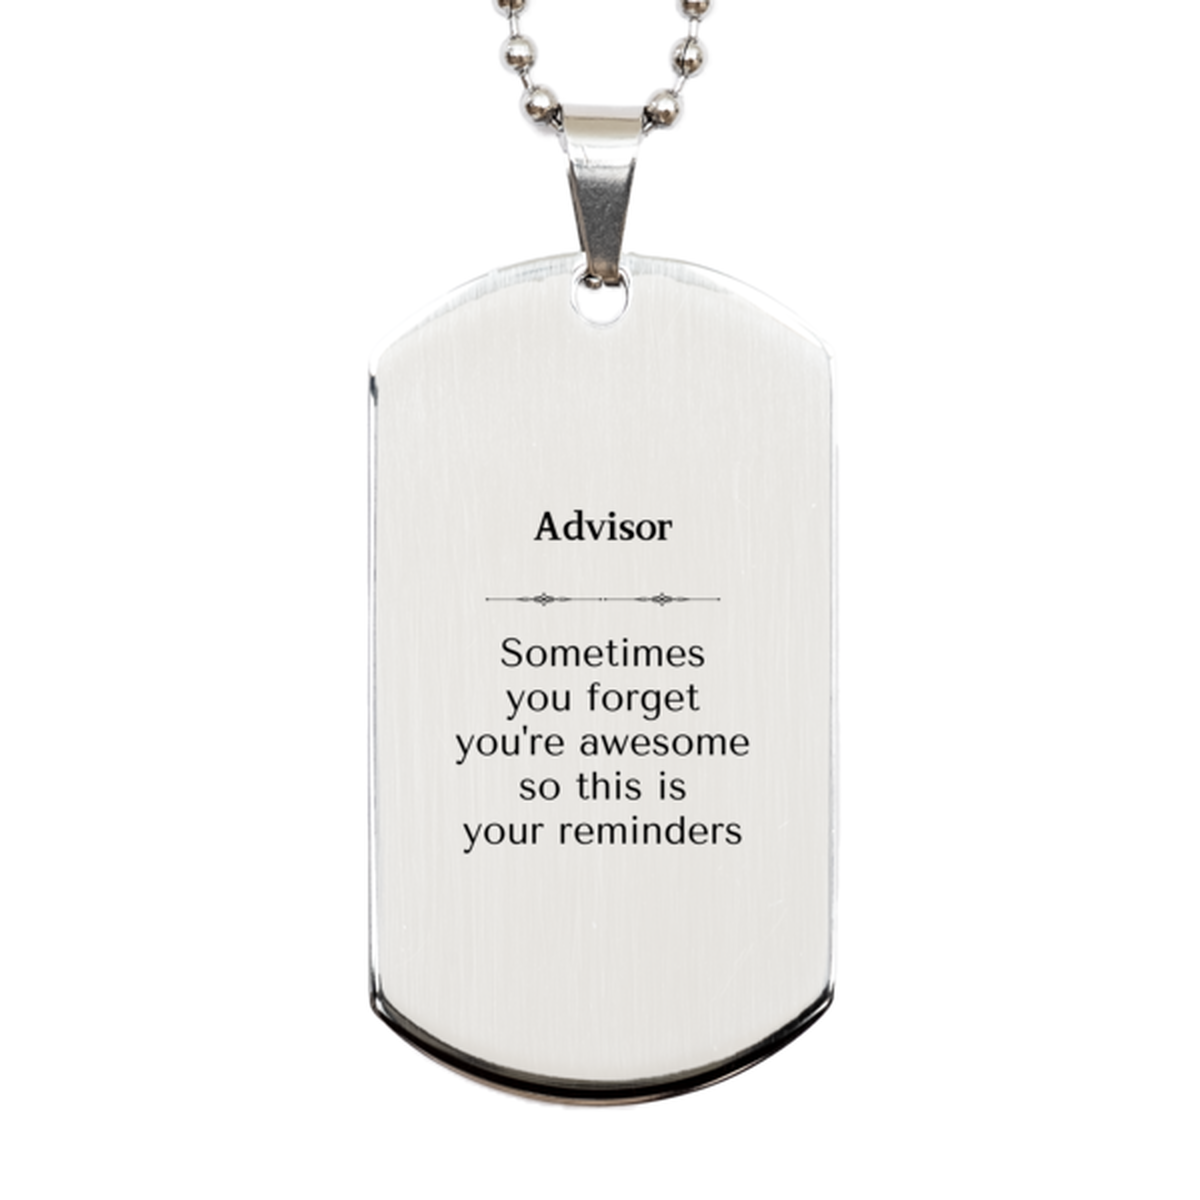 Sentimental Advisor Silver Dog Tag, Advisor Sometimes you forget you're awesome so this is your reminders, Graduation Christmas Birthday Gifts for Advisor, Men, Women, Coworkers